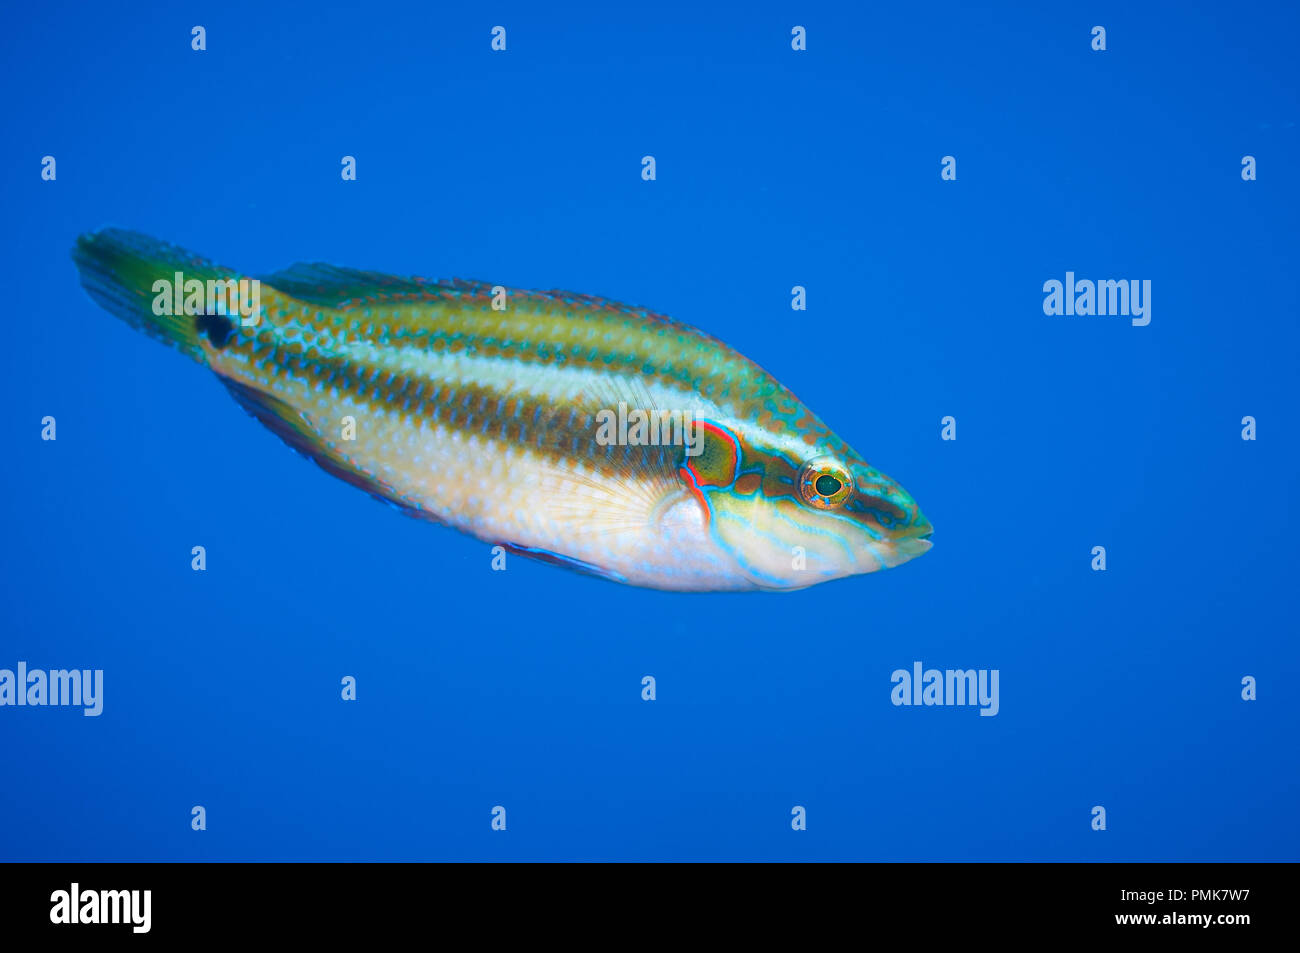 An ocellated wrasse (Symphodus ocellatus) male in nuptial livery in Mediterranean Sea (Ses Salines Natural Park, Formentera, Balearic Islands, Spain) Stock Photo